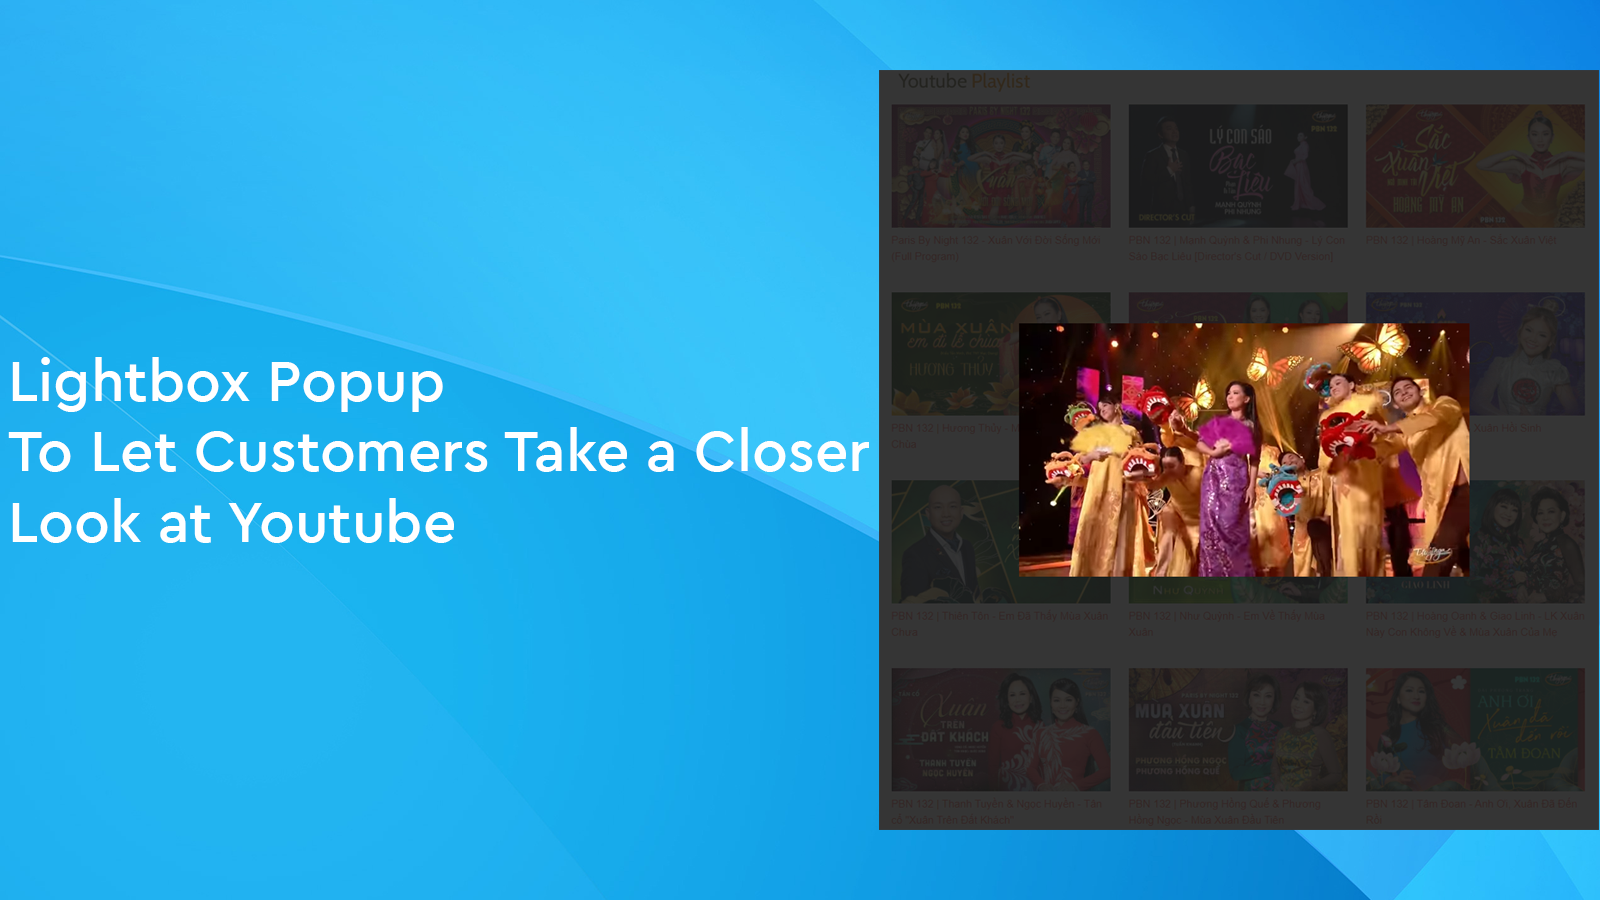 Lightbox popup to let customers take a closer look at Youtube